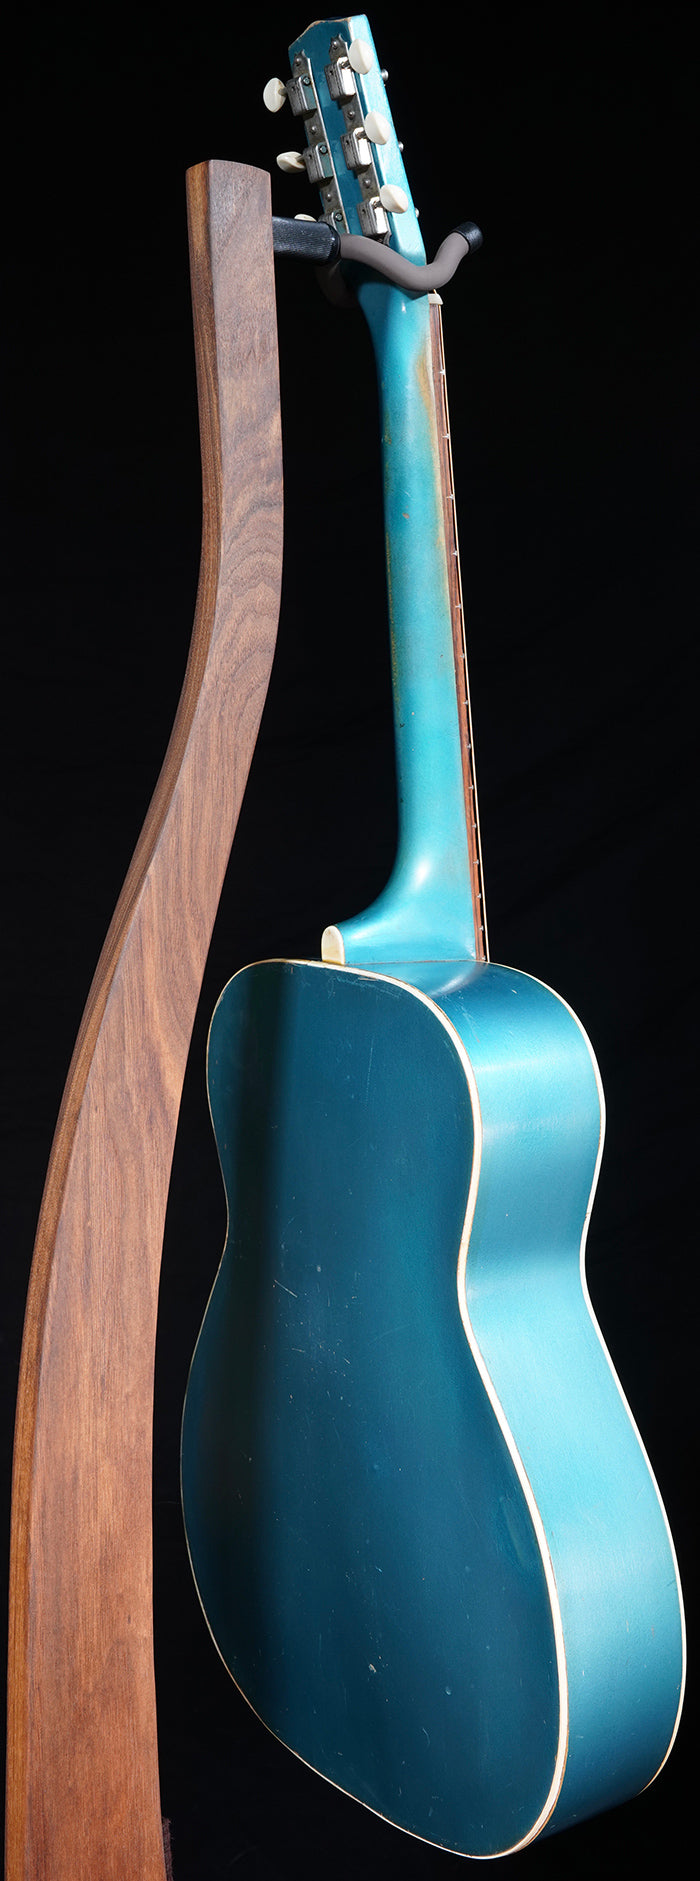 Circa 1930s/Early 1940s Archtop